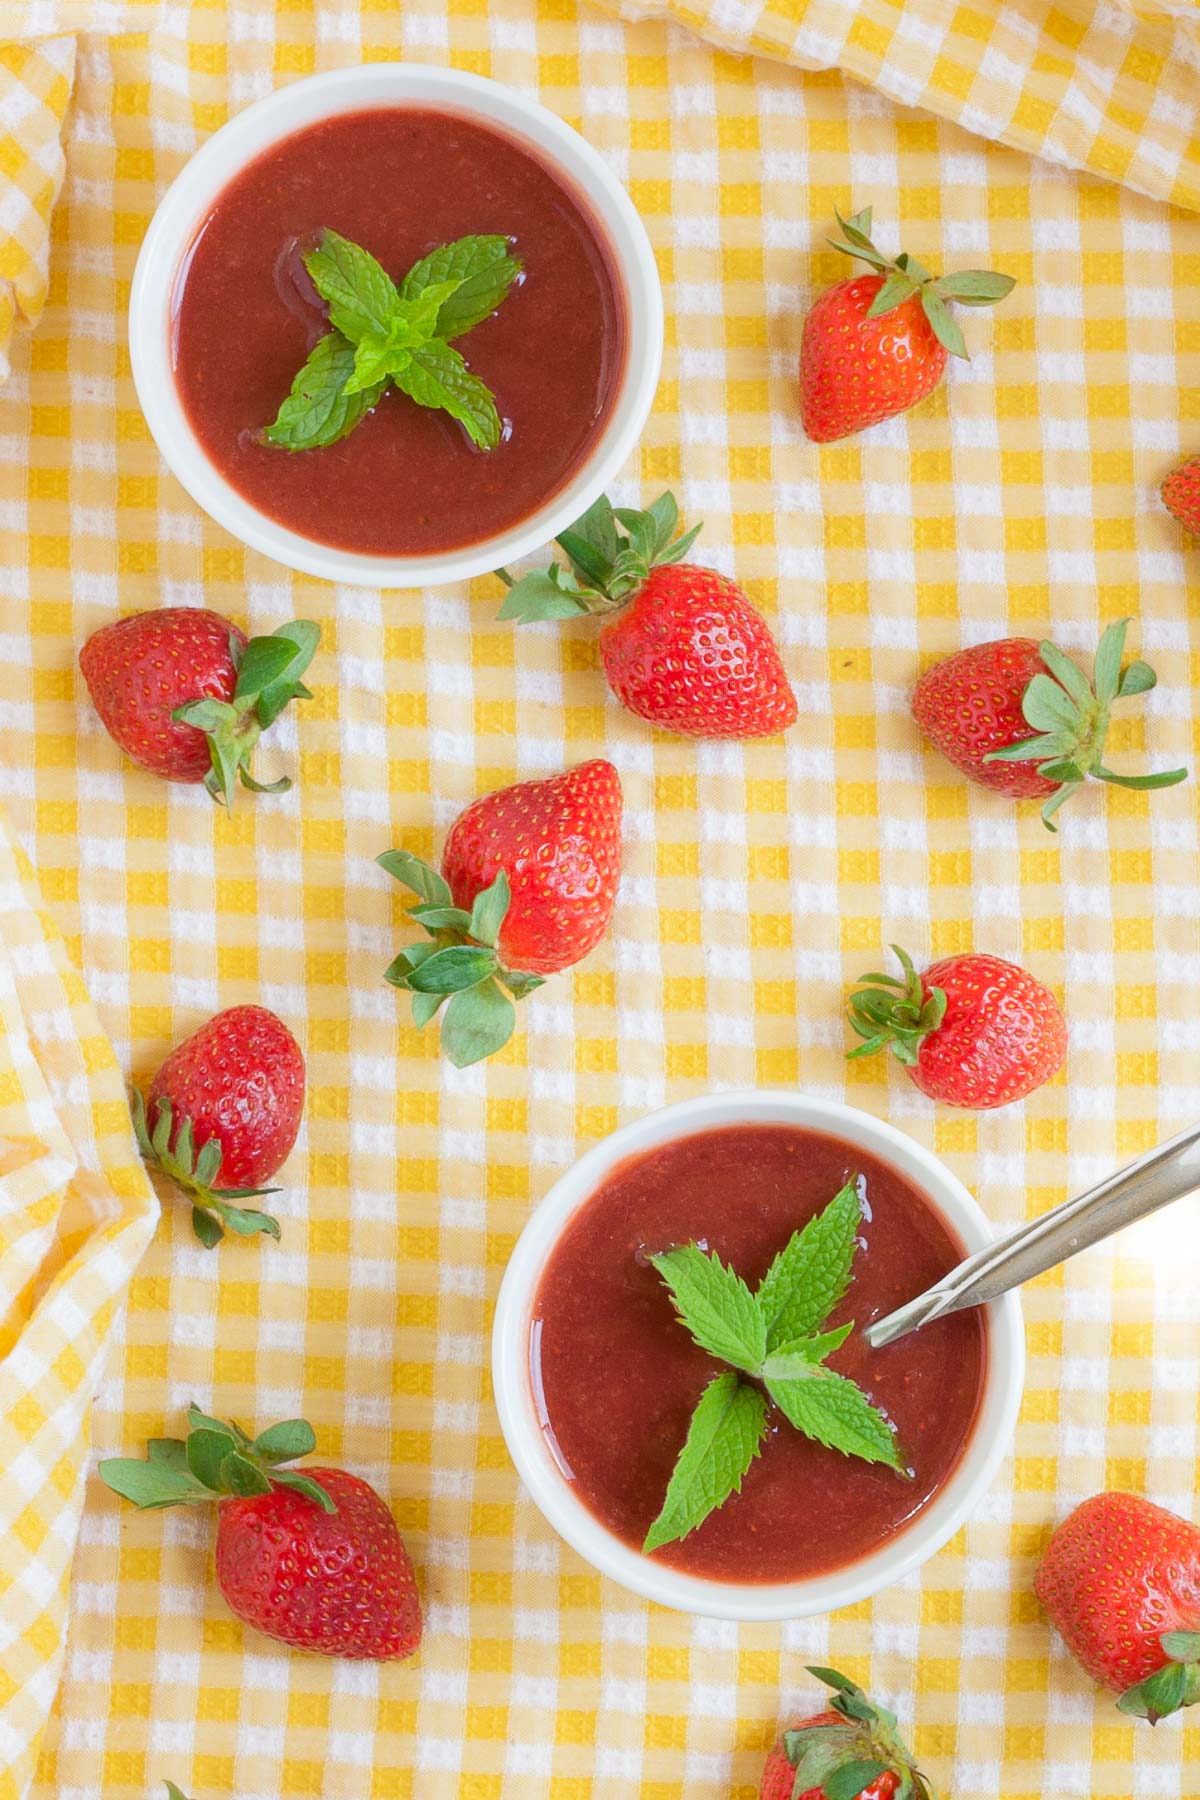 Two small white bowls with strawberry puree and some mint leaves. More fresh strawberries are scattered around it on a yellow tablecloth.